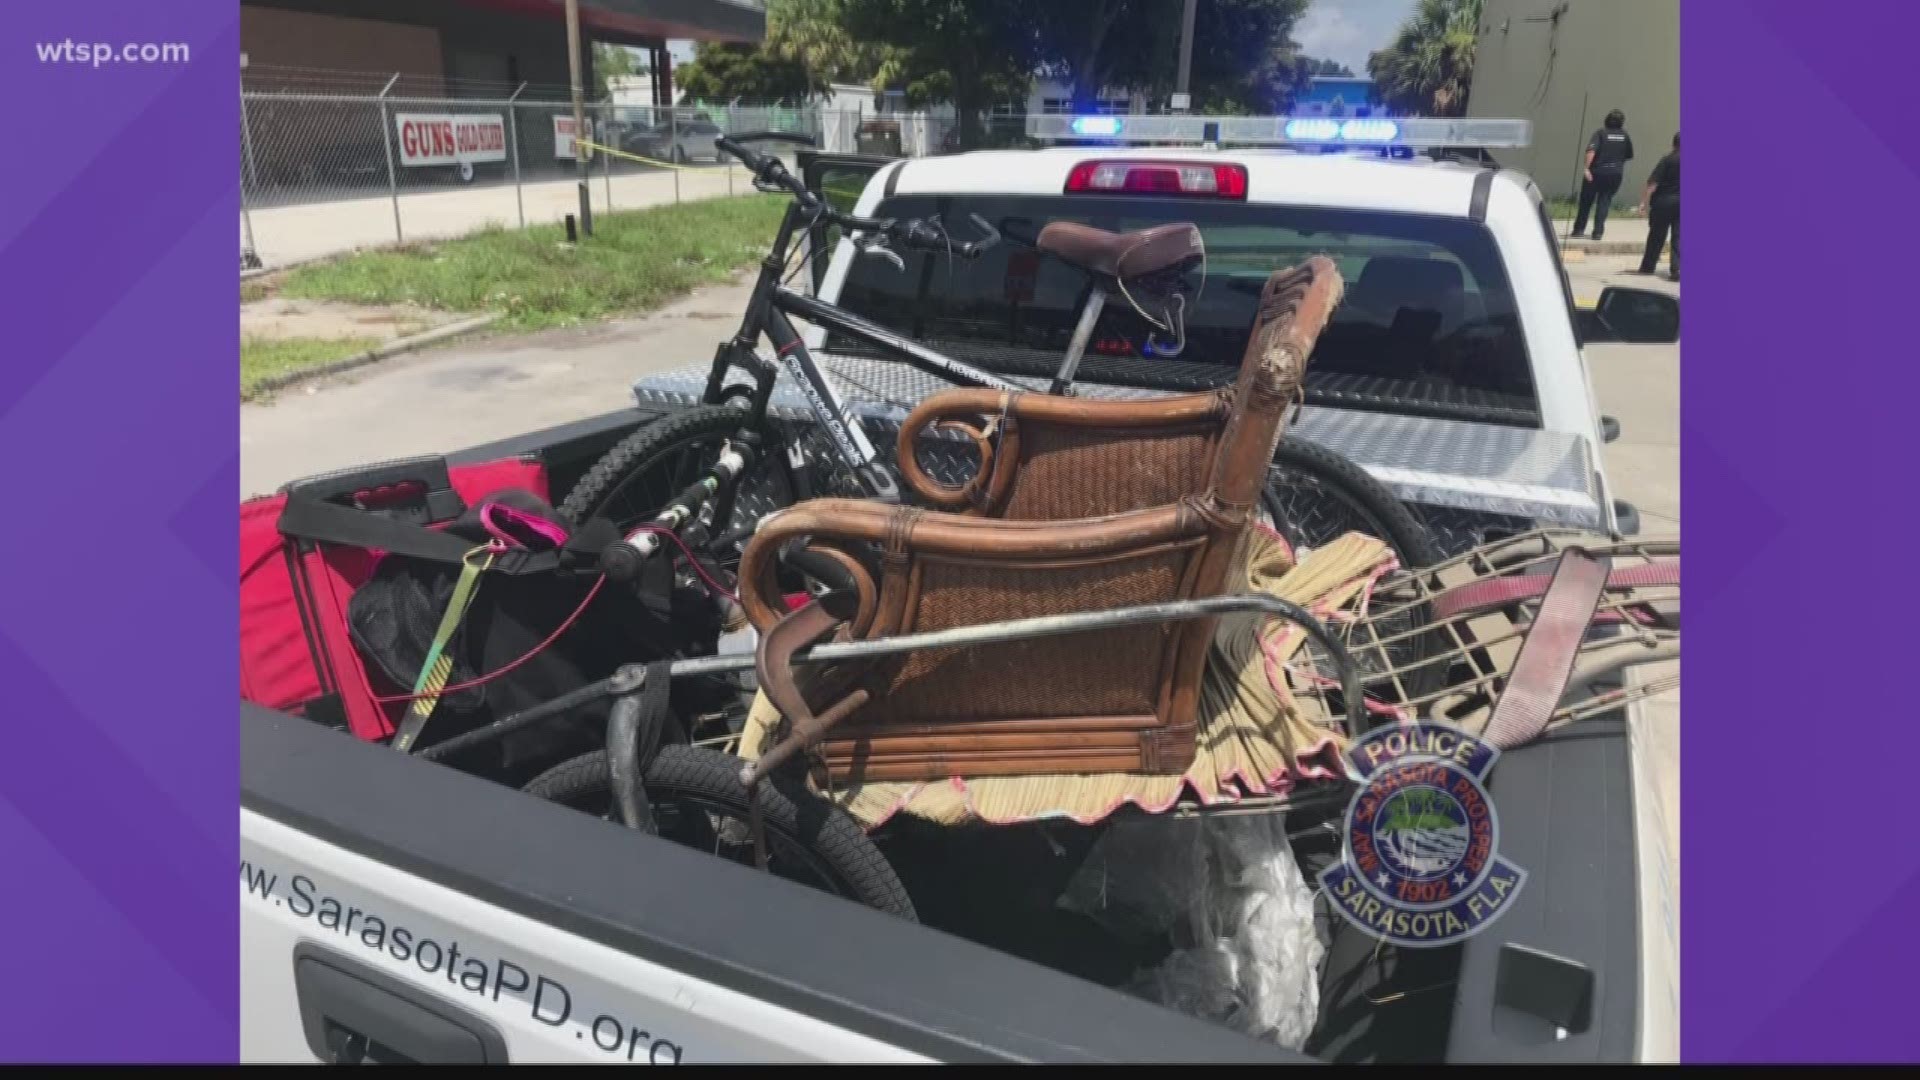 Two toddlers have been flown to the hospital after a bike accident in Sarasota.

Their father was towing the boys -- ages 3 and 5 -- in a wagon behind the bicycle when the bike hit a curb, and the children were ejected.